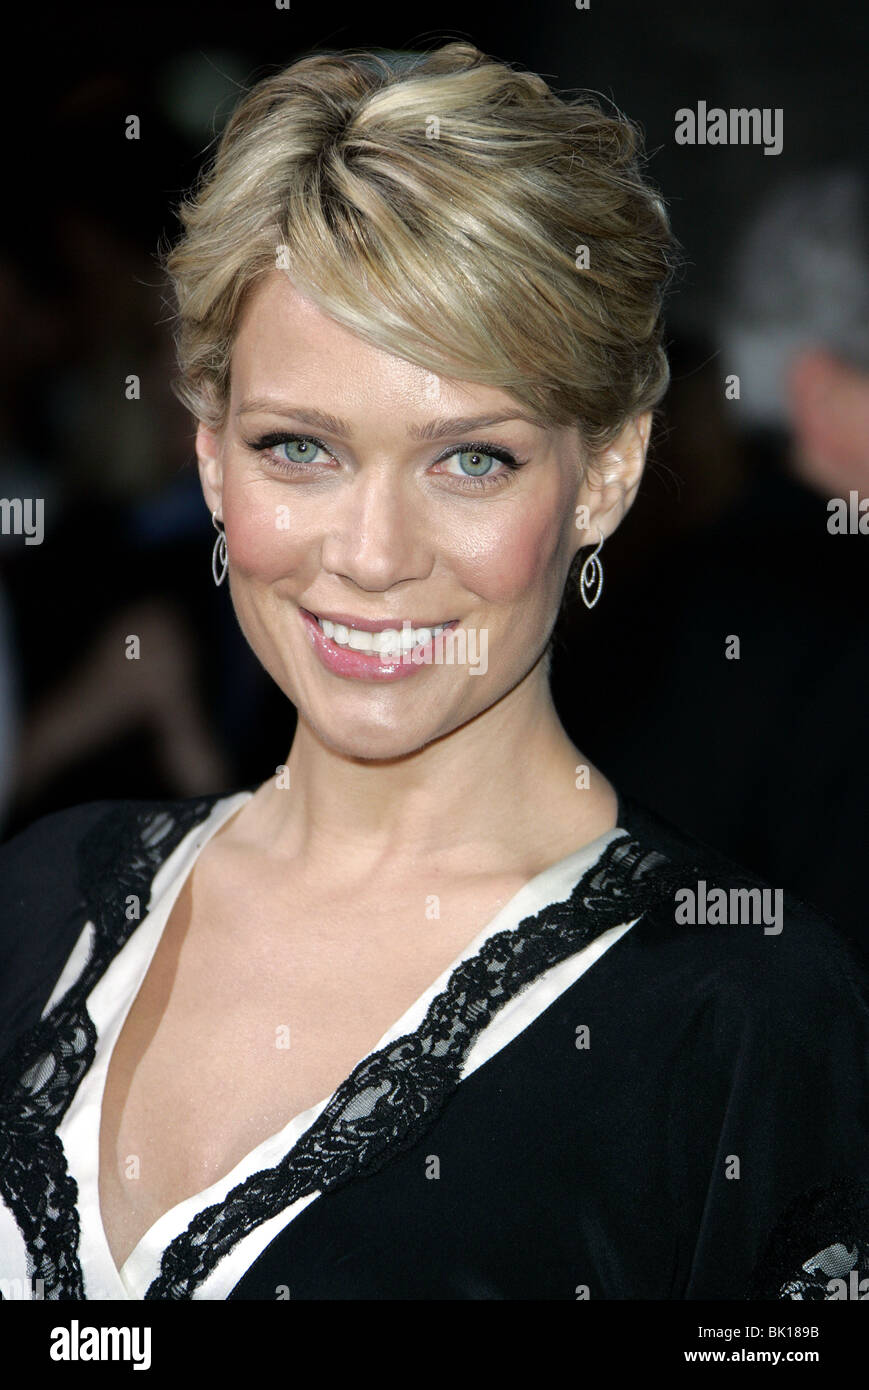 LAURIE HOLDEN SILENT HILL WORLD PREMIERE HOLLYWOOD LOS ANGELES USA 20 April 2006 Stock Photo